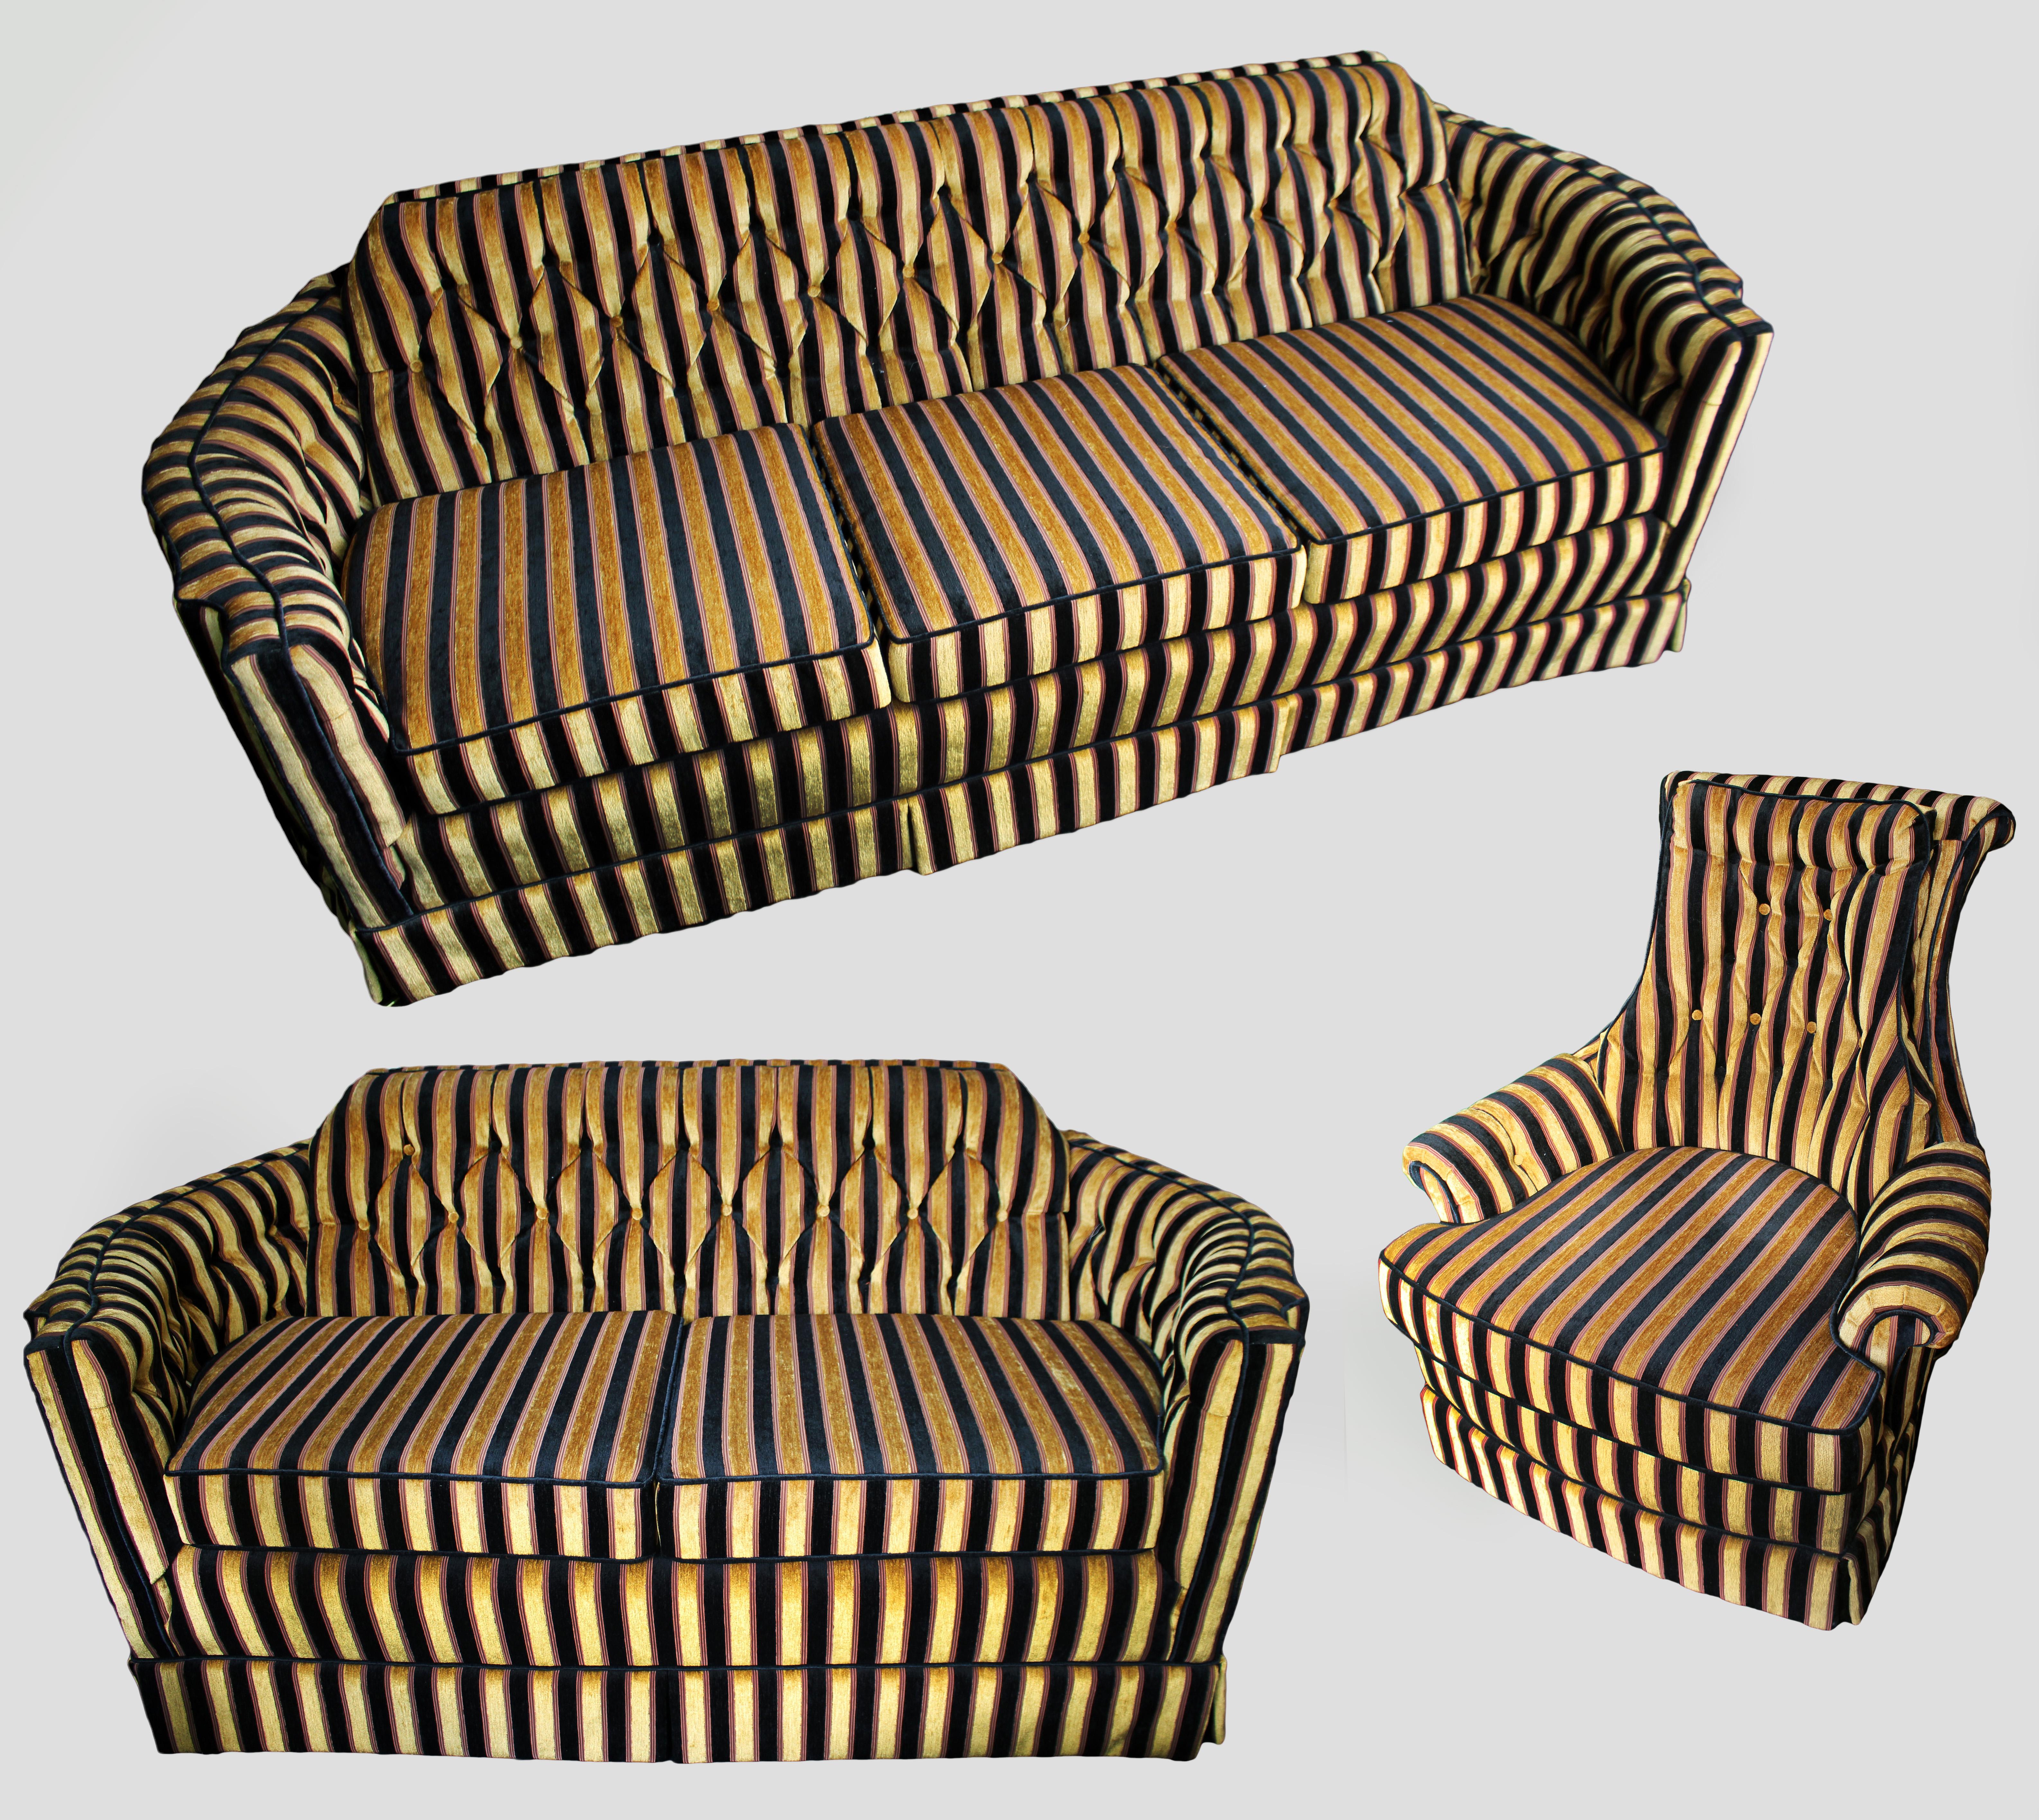 Fine newly upholstered gold striped three piece bridgecraft suite c.1970

Three seater sofa
Measures: Width: 230 cm
Depth: 86 cm
Height: 74 cm

Two Seater Sofa
Width: 173 cm
Depth: 86 cm
Height: 74 cm

Armchair
Width: 87 cm
Depth: 86